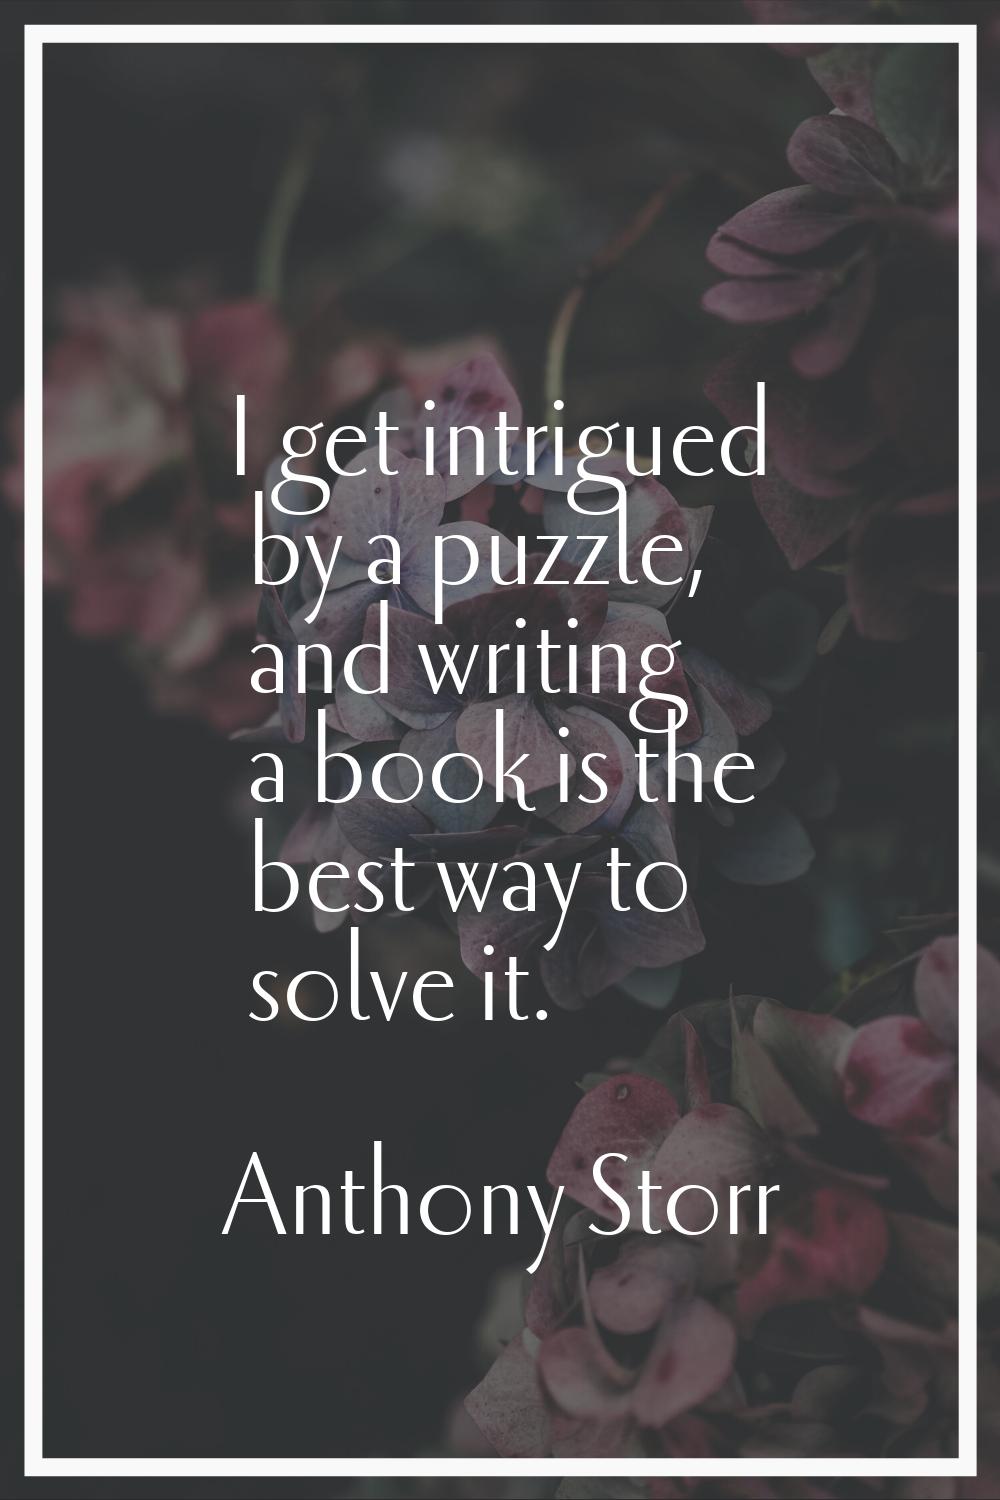 I get intrigued by a puzzle, and writing a book is the best way to solve it.